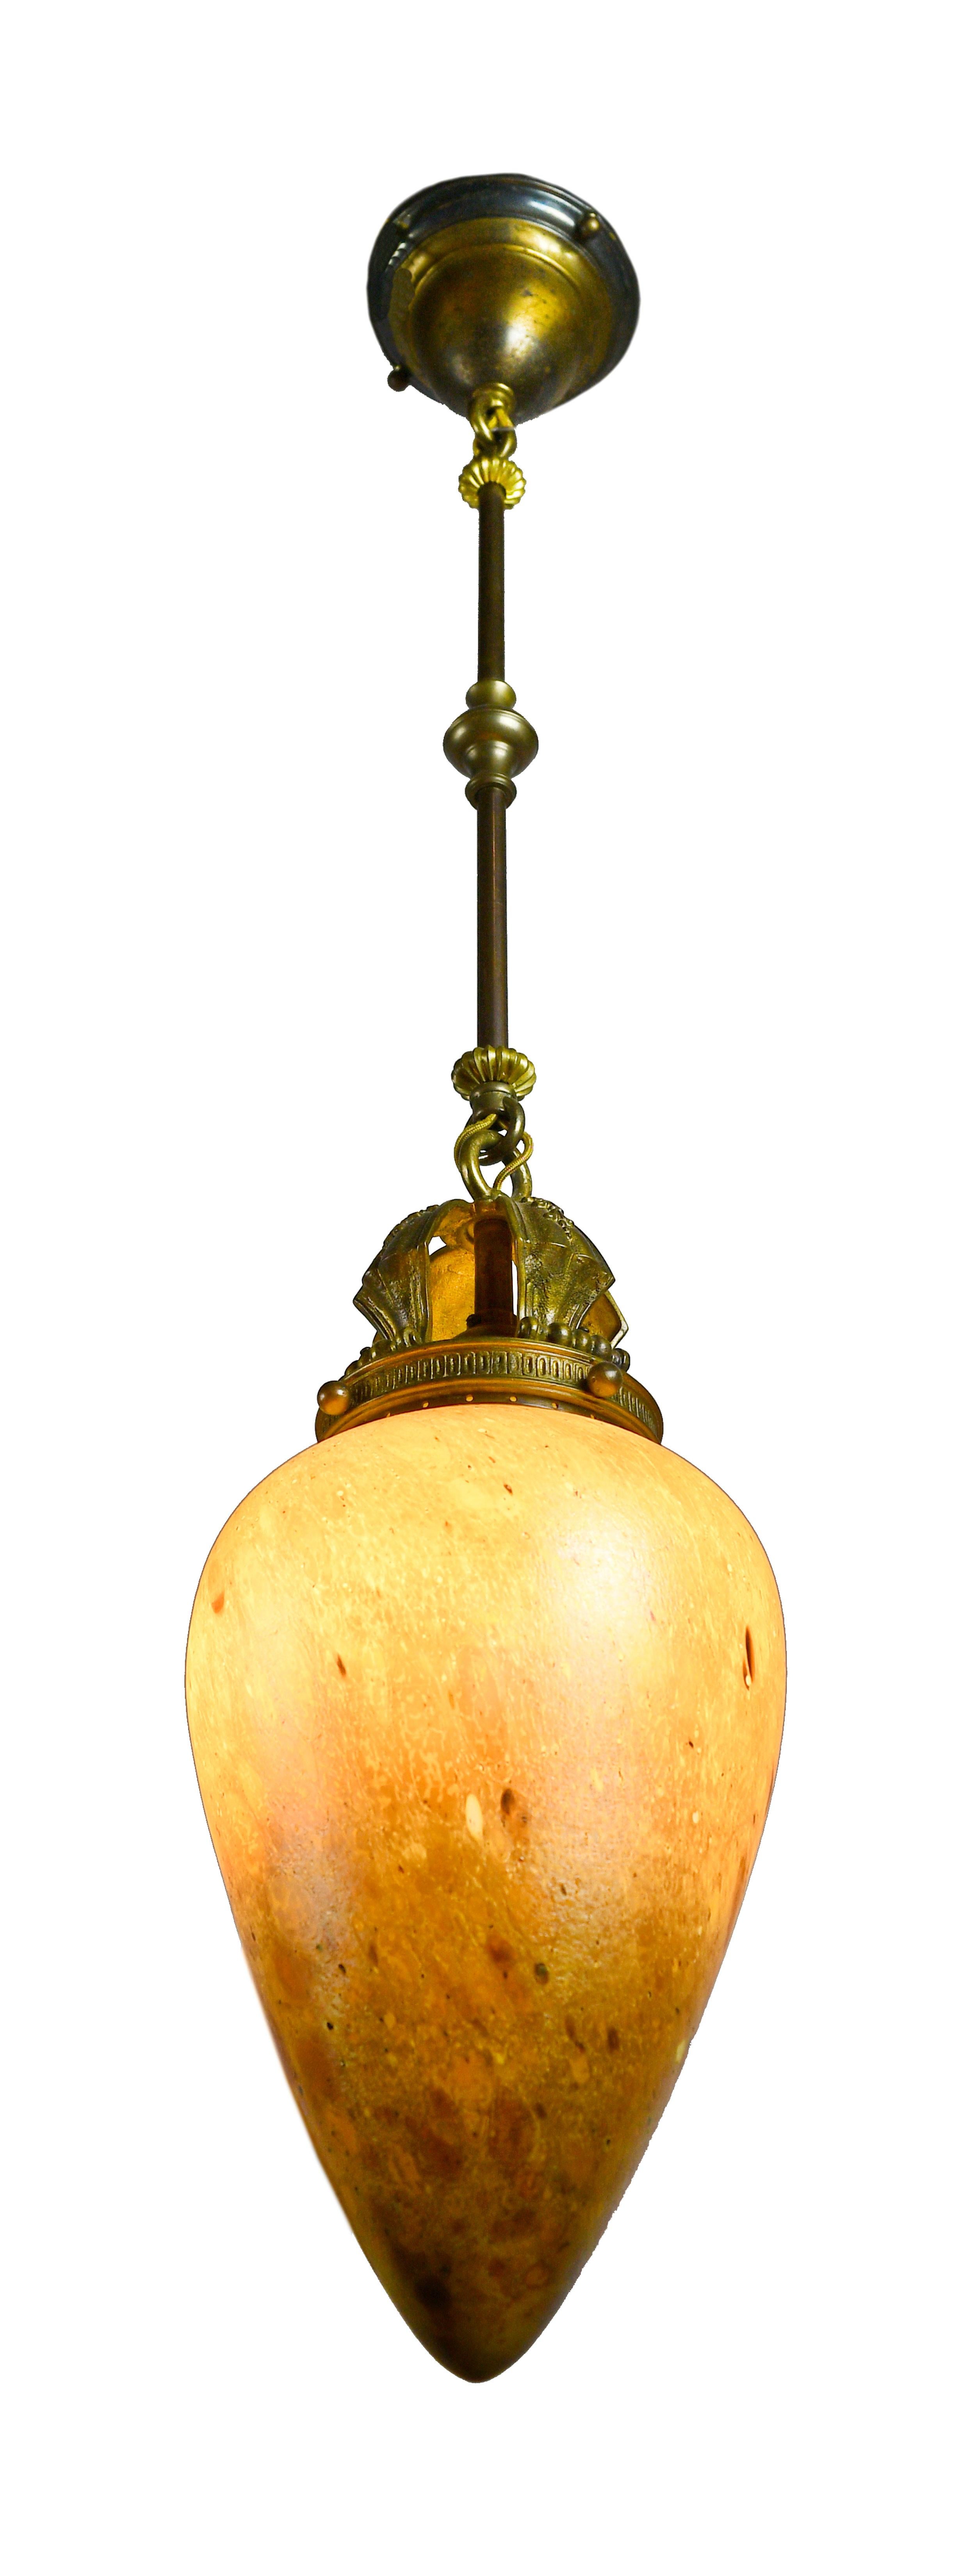 This finely crafted pendant features intricate detailing and an absolutely stunning Steuben shade that gives off a warm orange glow when illuminated.
Steuben Glass works was founded in 1903 by Frederick Carder, who has honed his craft in England.